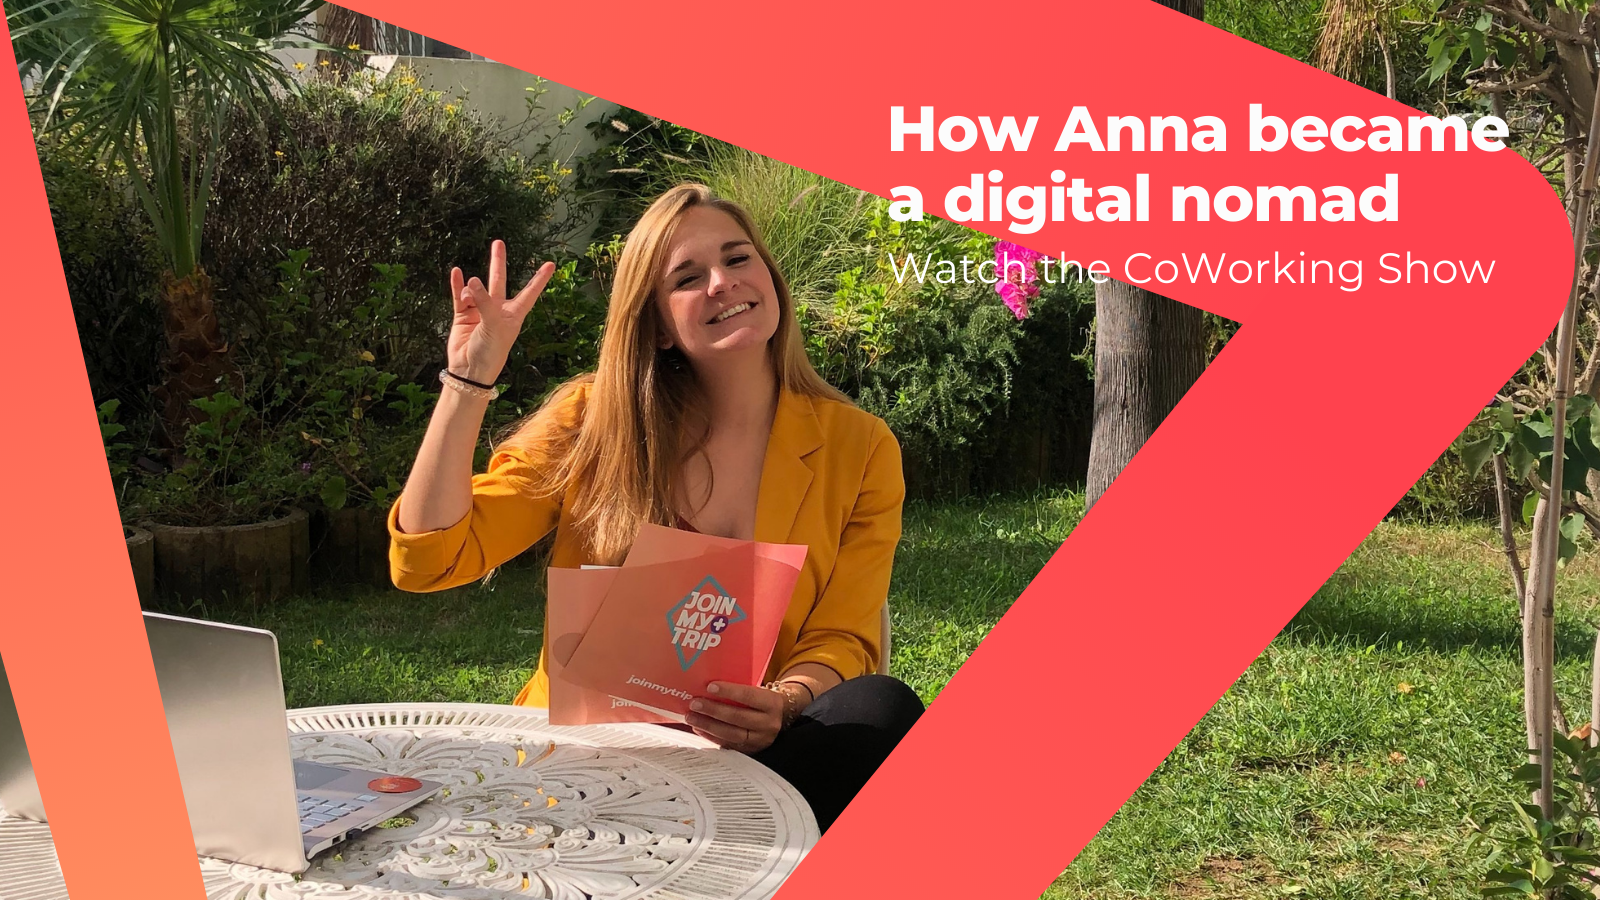 How I Became a Digital Nomad | CoWorking Show